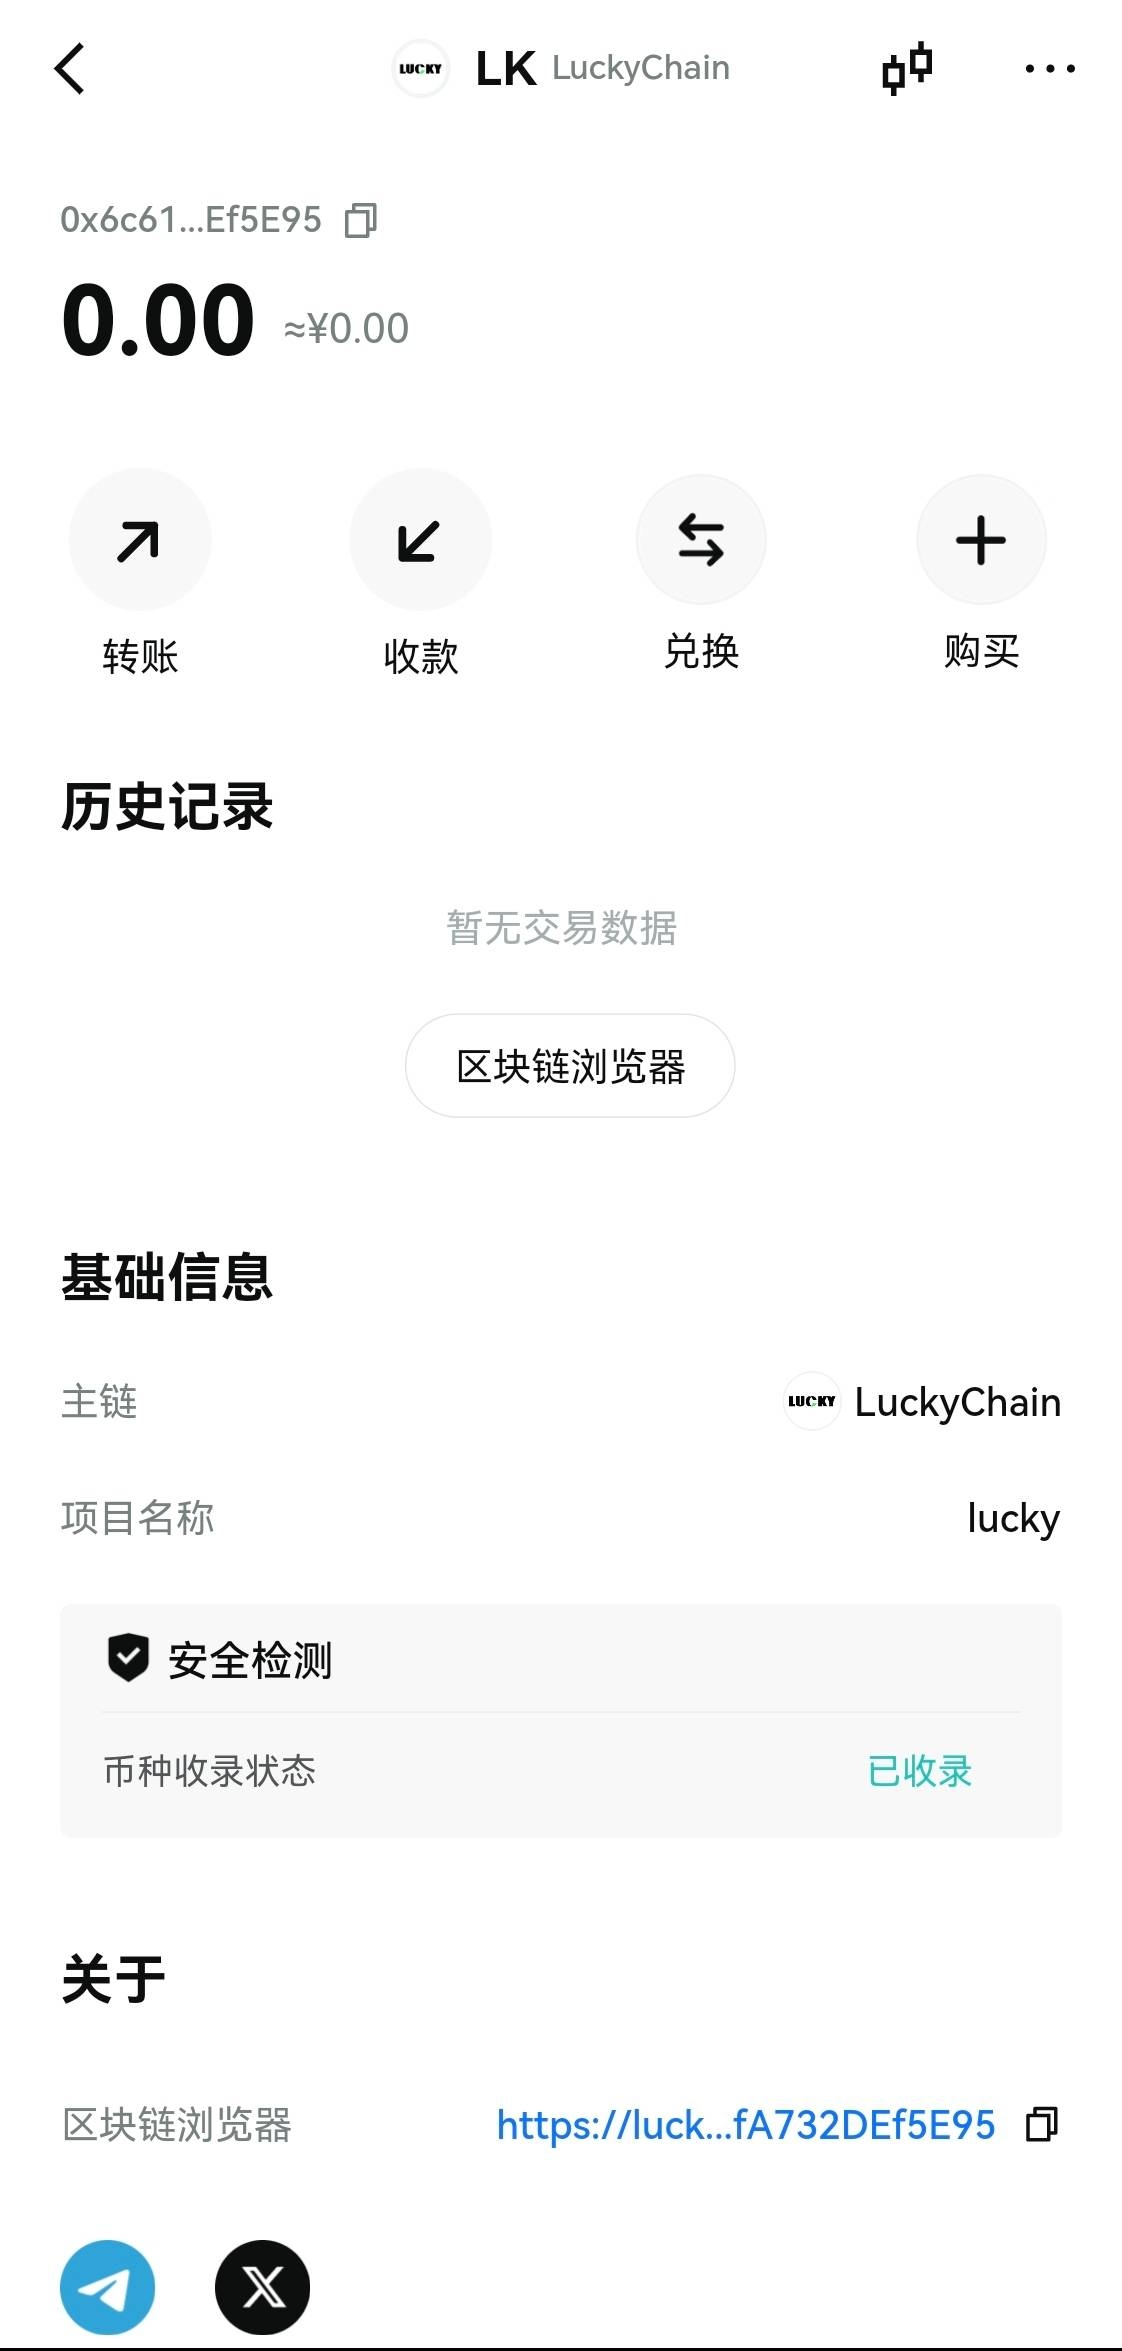 Lucky Chain Wallet